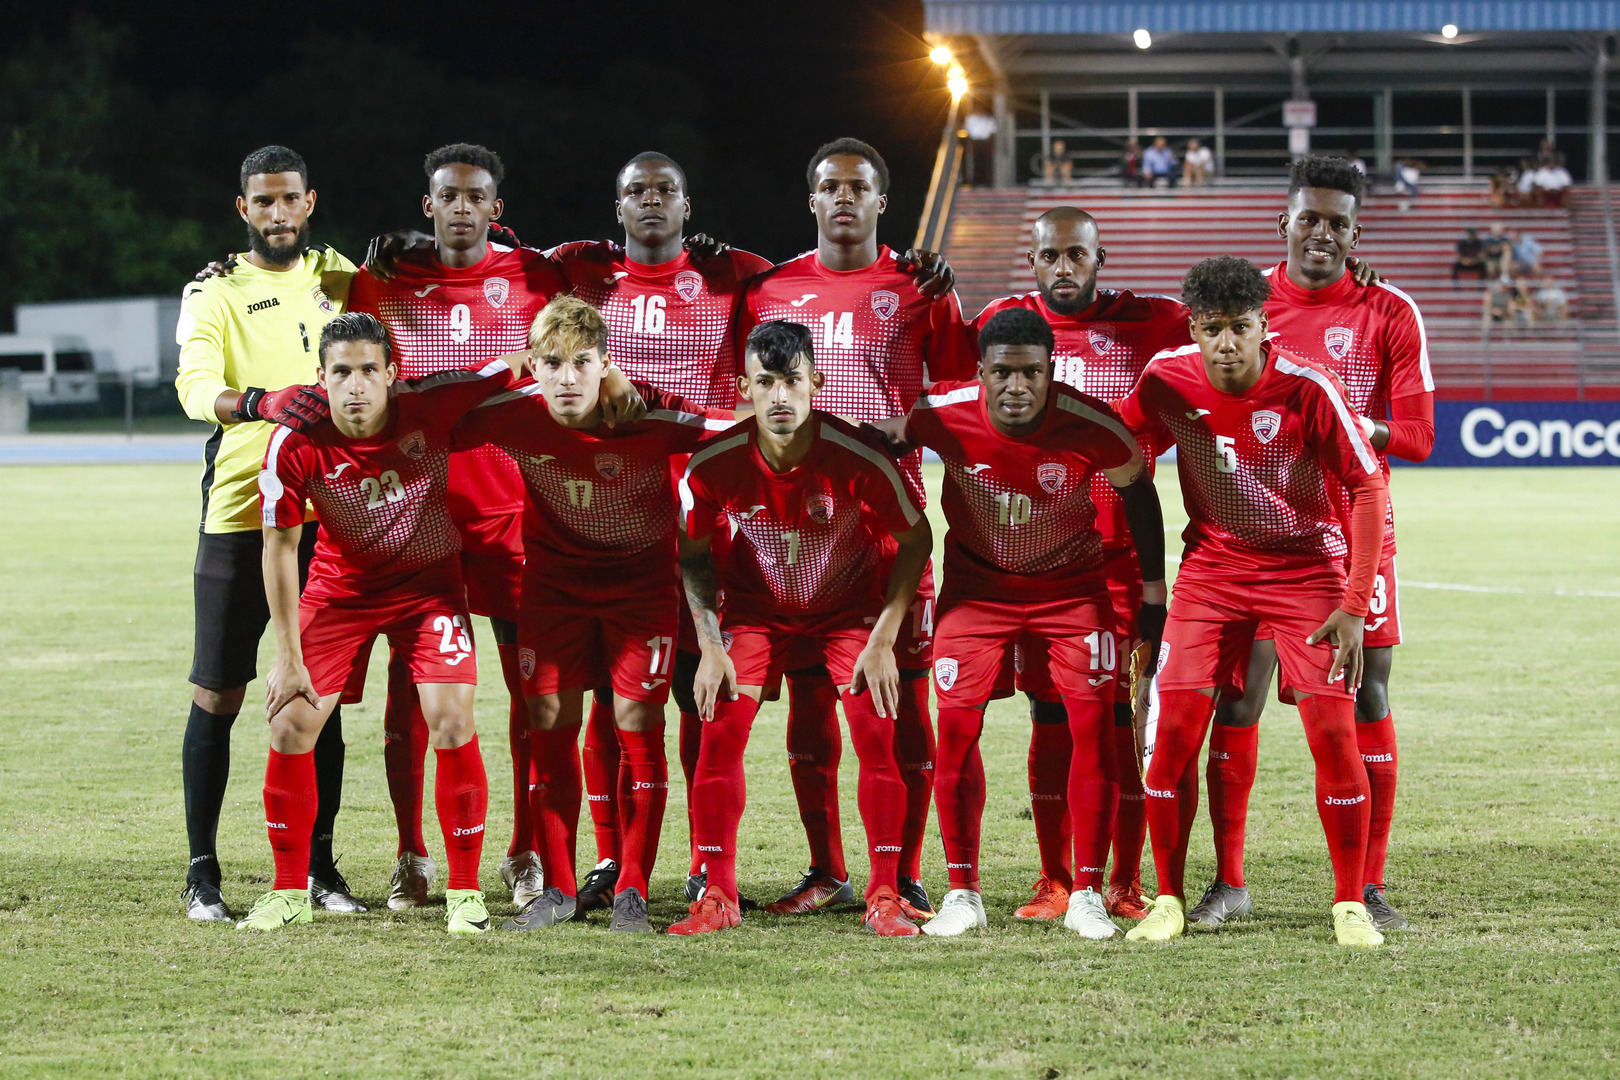 Cuba seeks World Cup qualification in next decade